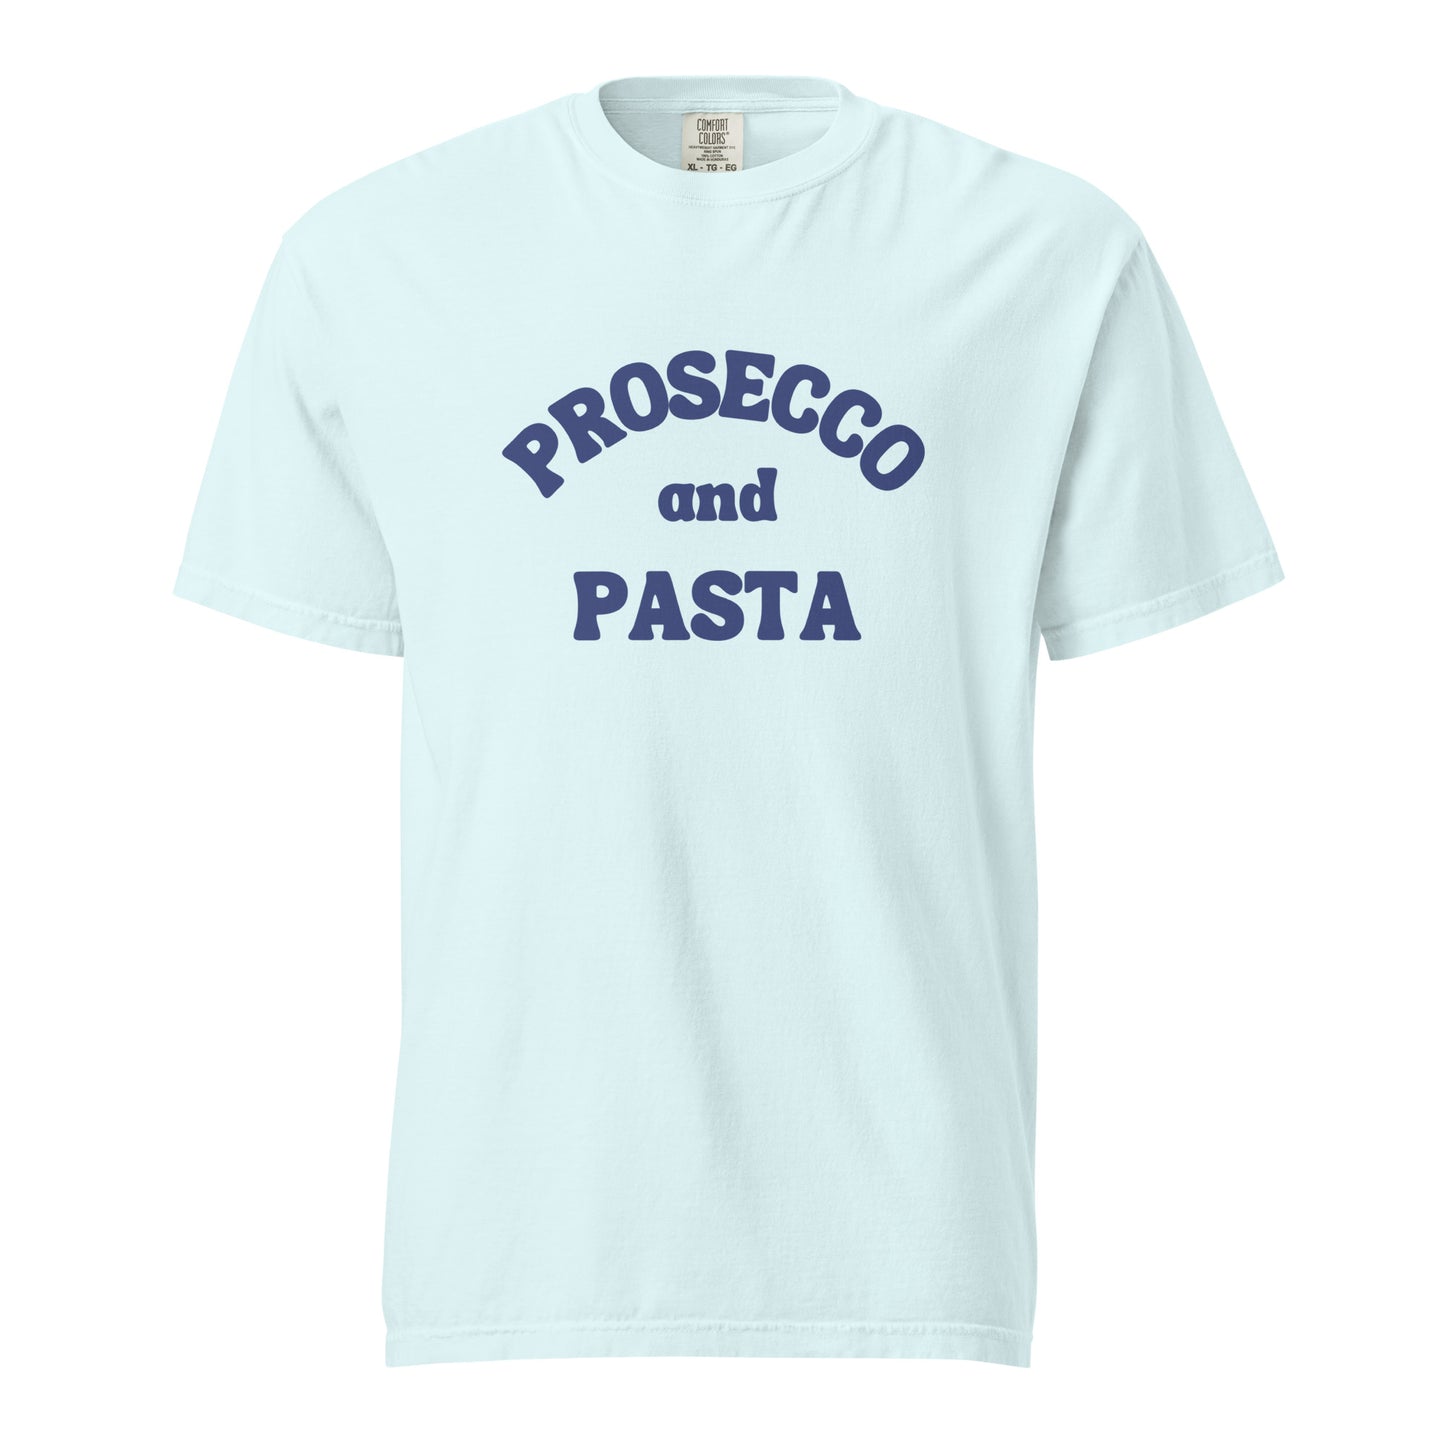 Prosecco and Pasta Tee